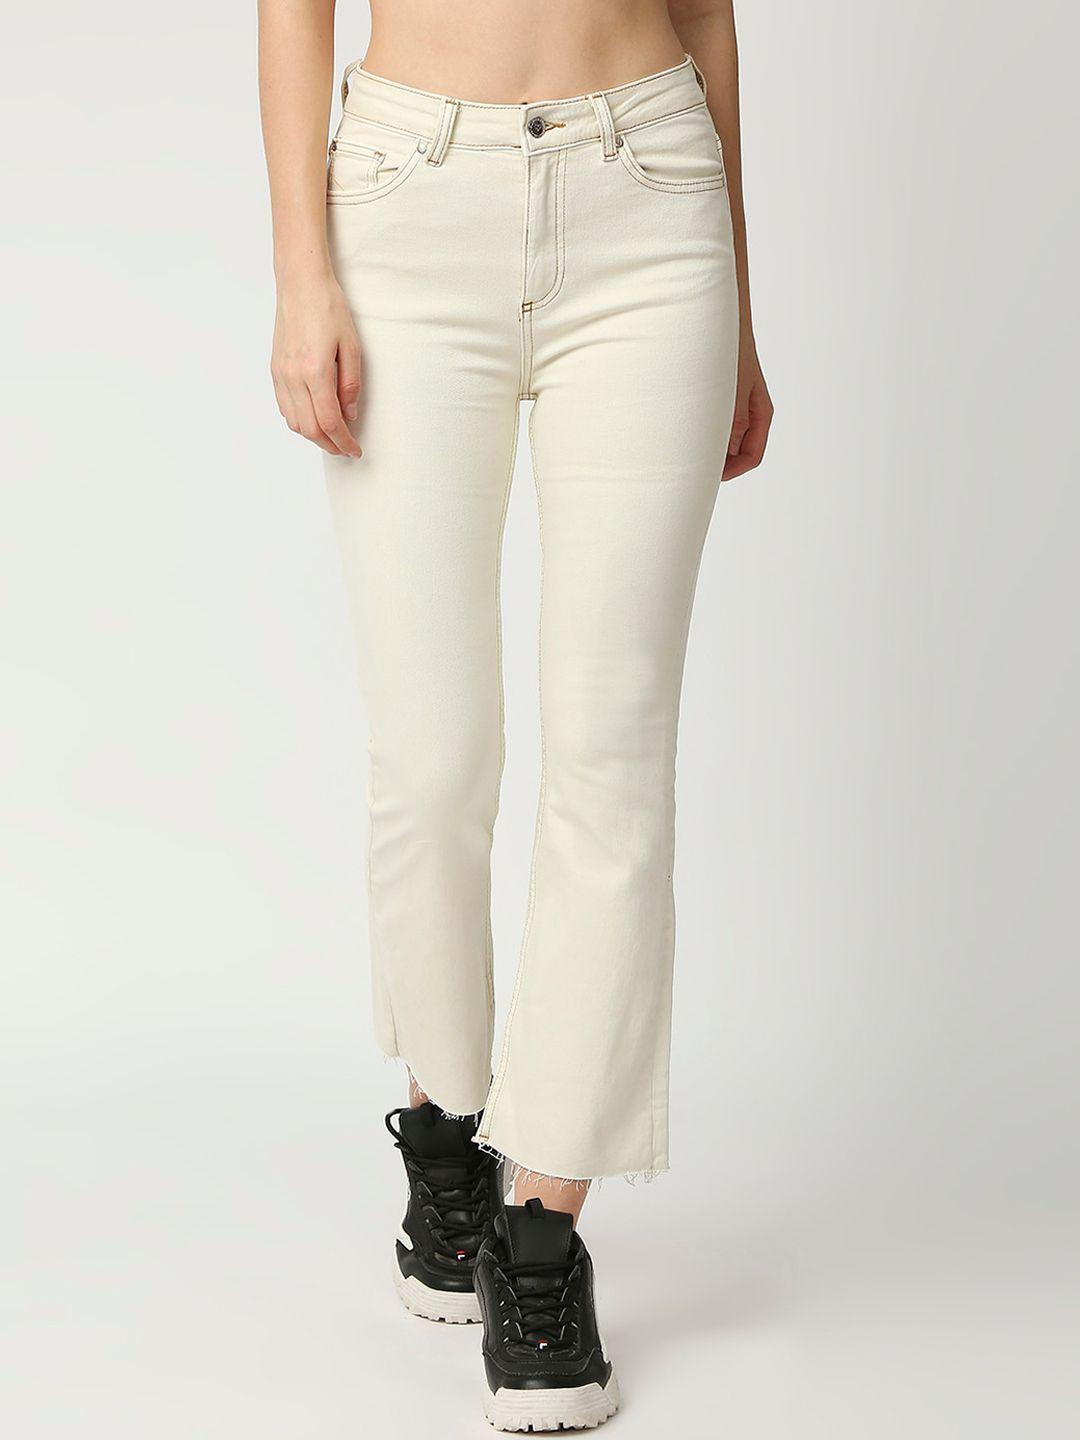 lovegen women off white flared stretchable flared cropped jeans